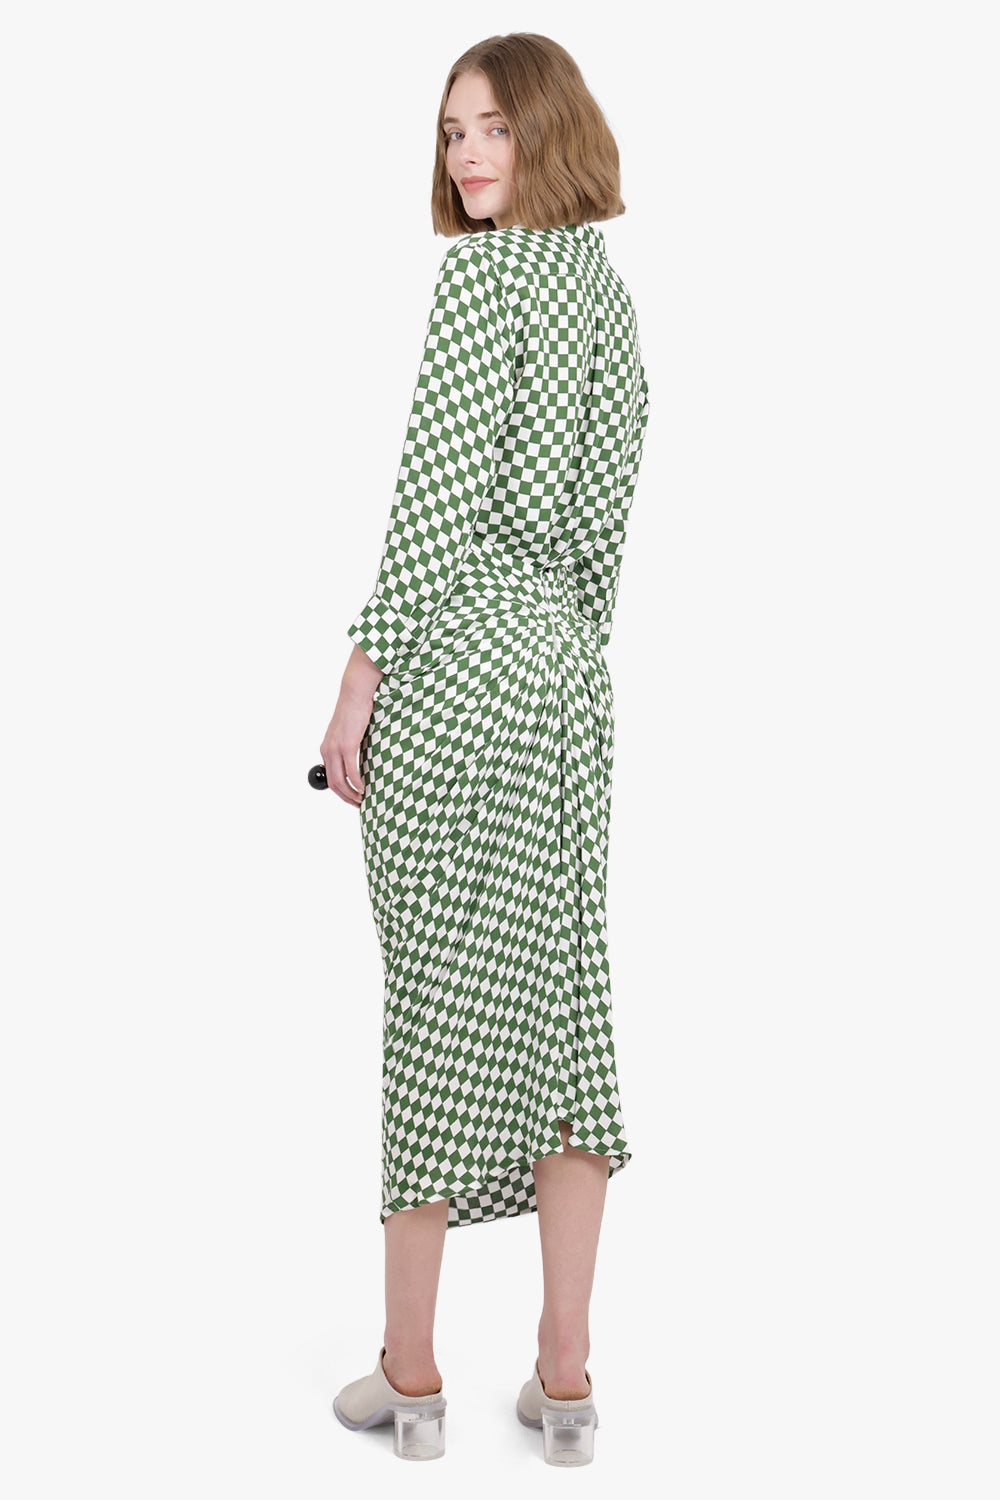 DRIES VAN NOTEN RTW Checkerboard Ruched Side Bodycon Maxi Skirt | Green